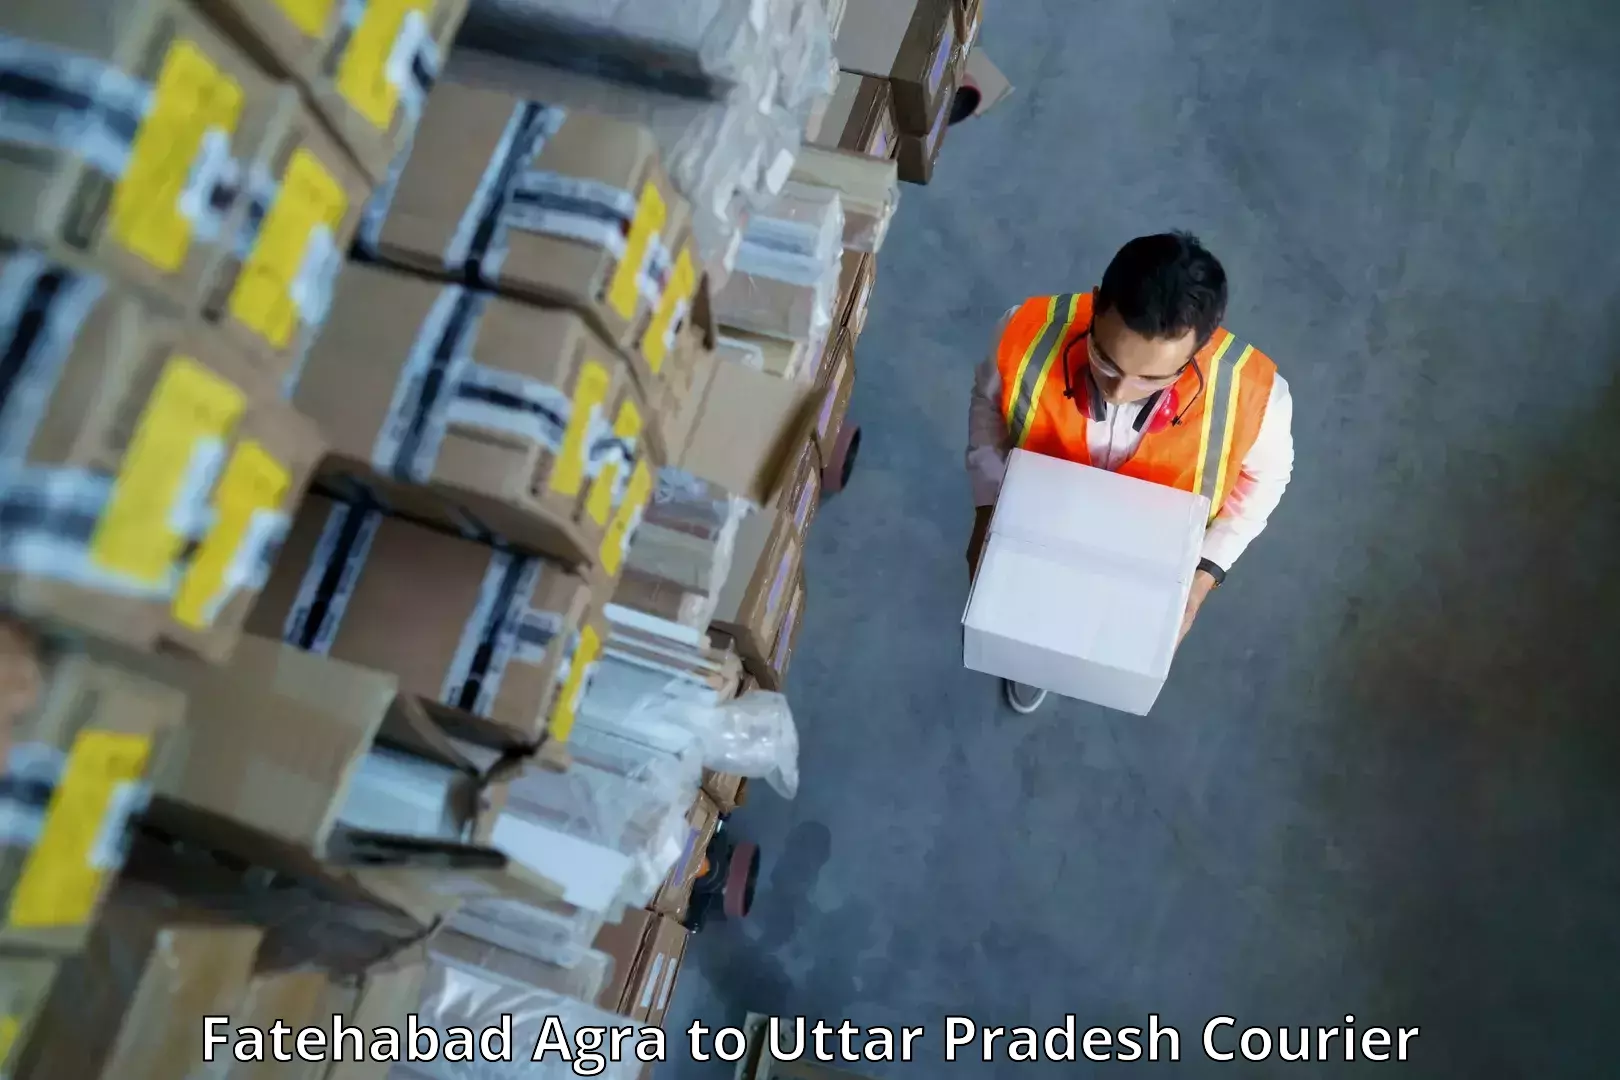 Nationwide courier service Fatehabad Agra to Kanpur